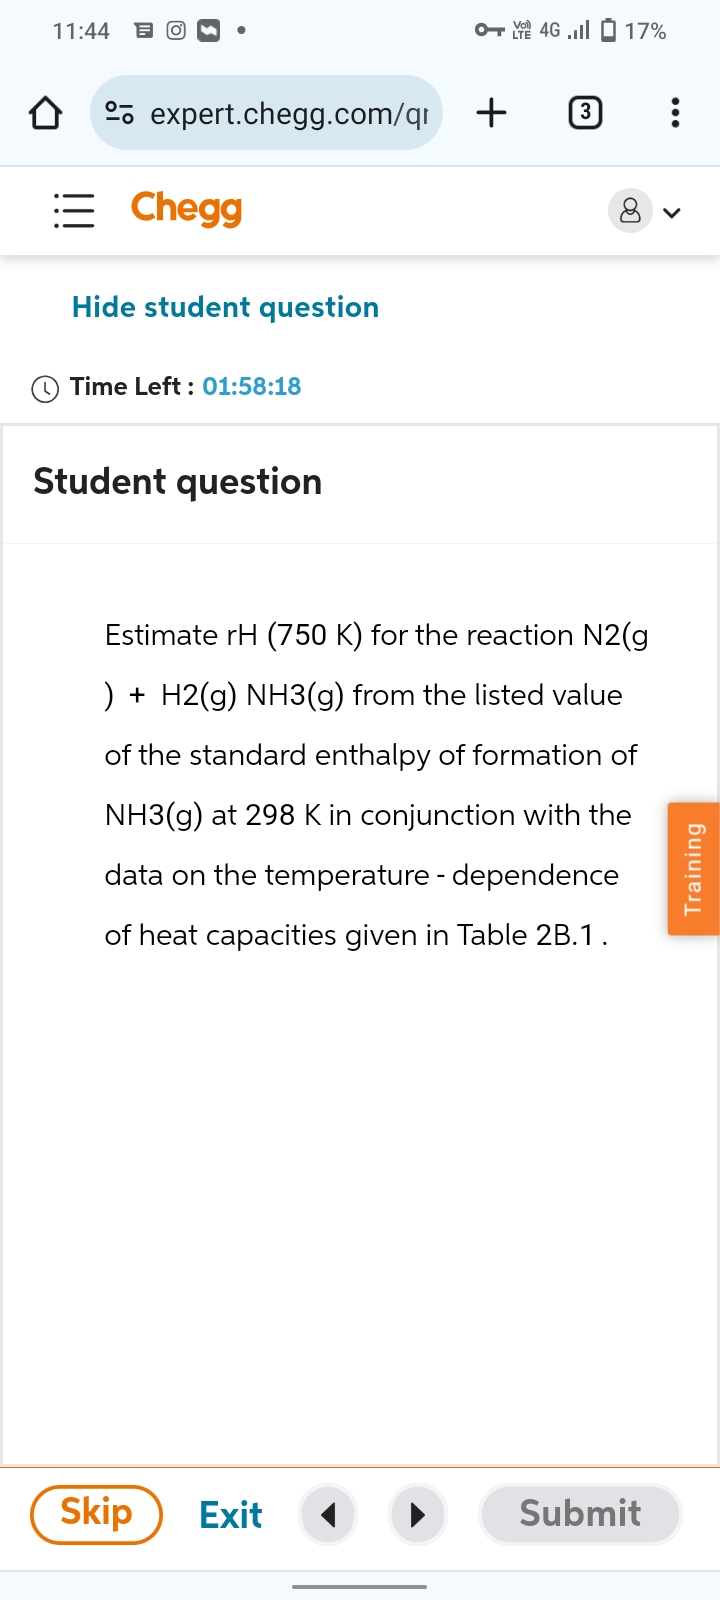 11:44 = O®
OVO 4G .ill 17%
expert.chegg.com/qr
+
3
Chegg
Hide student question
Time Left: 01:58:18
Student question
Estimate rH (750 K) for the reaction N2(g
) + H2(g) NH3(g) from the listed value
of the standard enthalpy of formation of
NH3(g) at 298 K in conjunction with the
data on the temperature - dependence
of heat capacities given in Table 2B.1.
Skip
Exit
Submit
Training